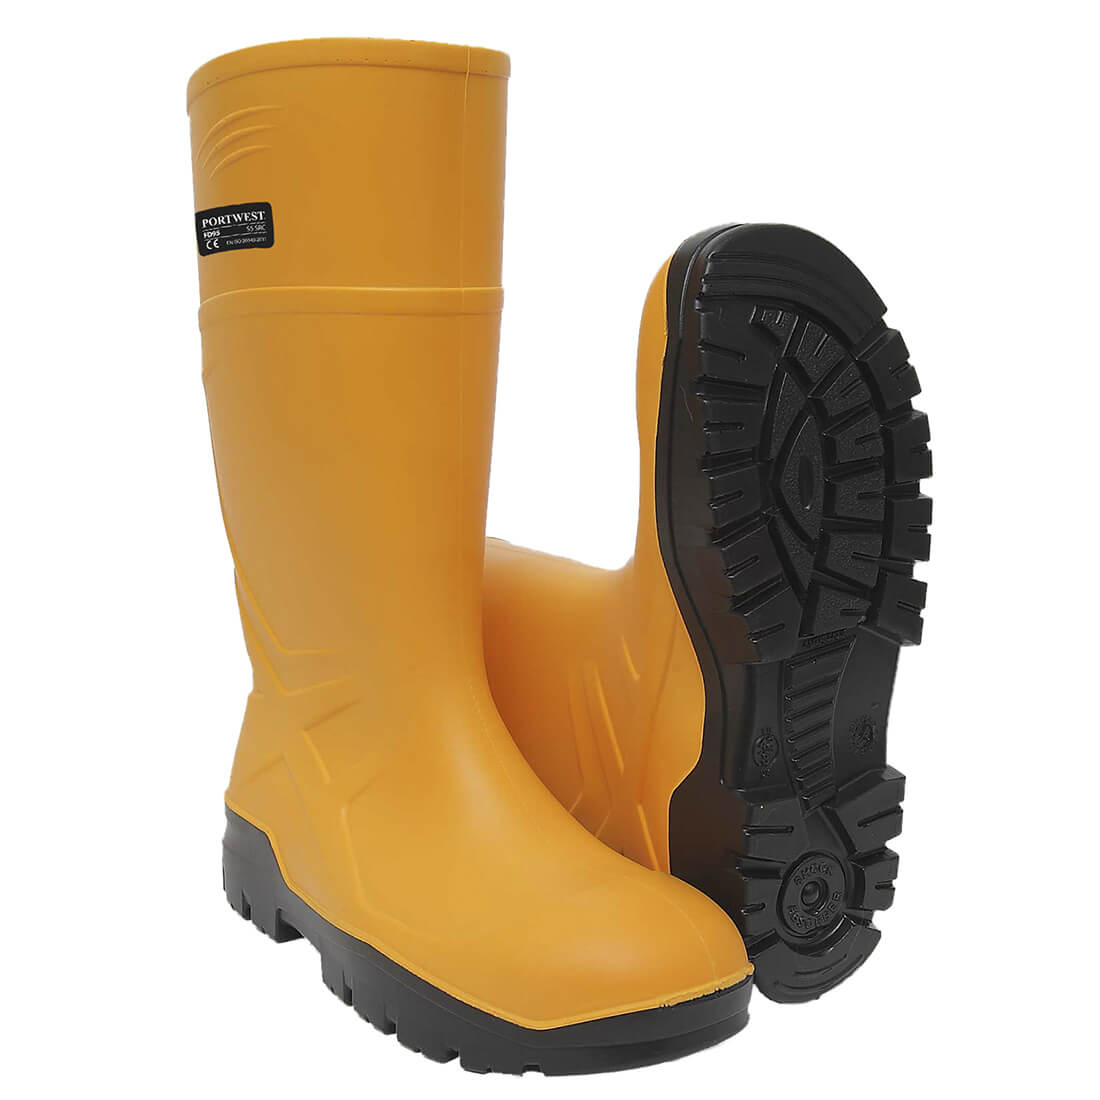 Portwest PU Safety Wellington Boots Yellow Size 9